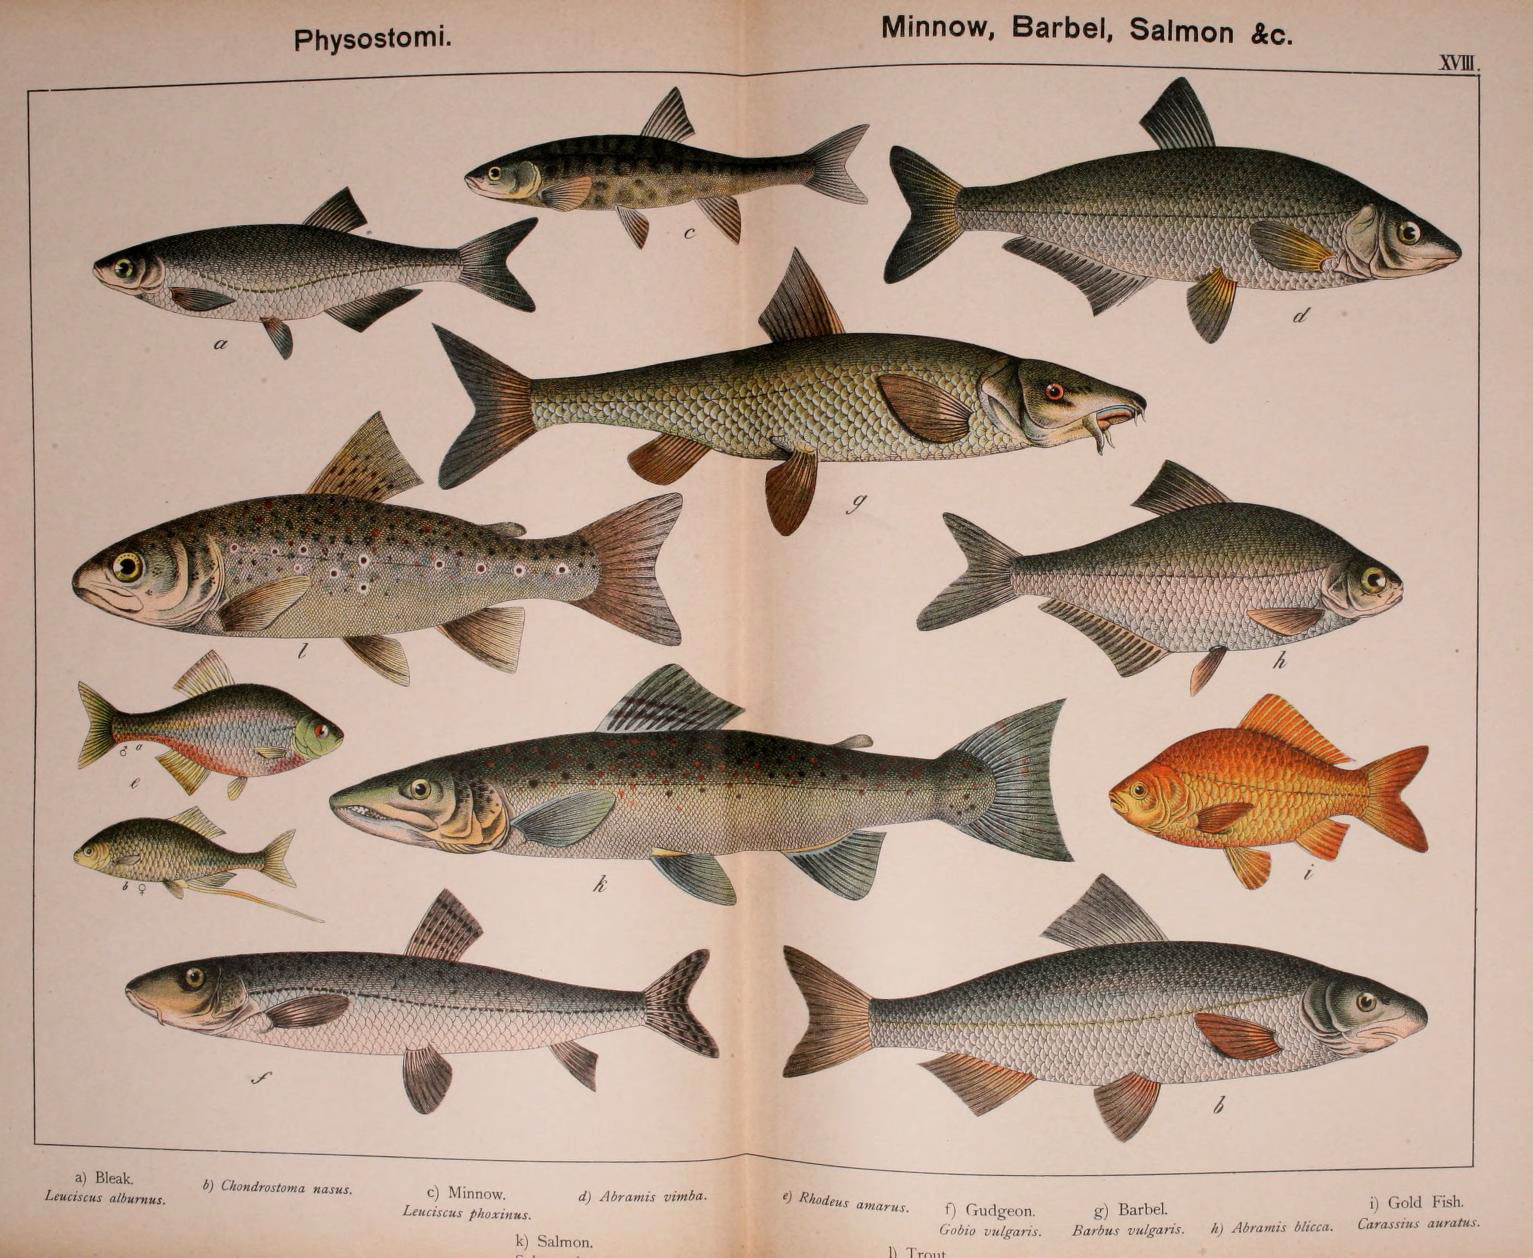 Two pages of illustrated fish of different shapes and sizes